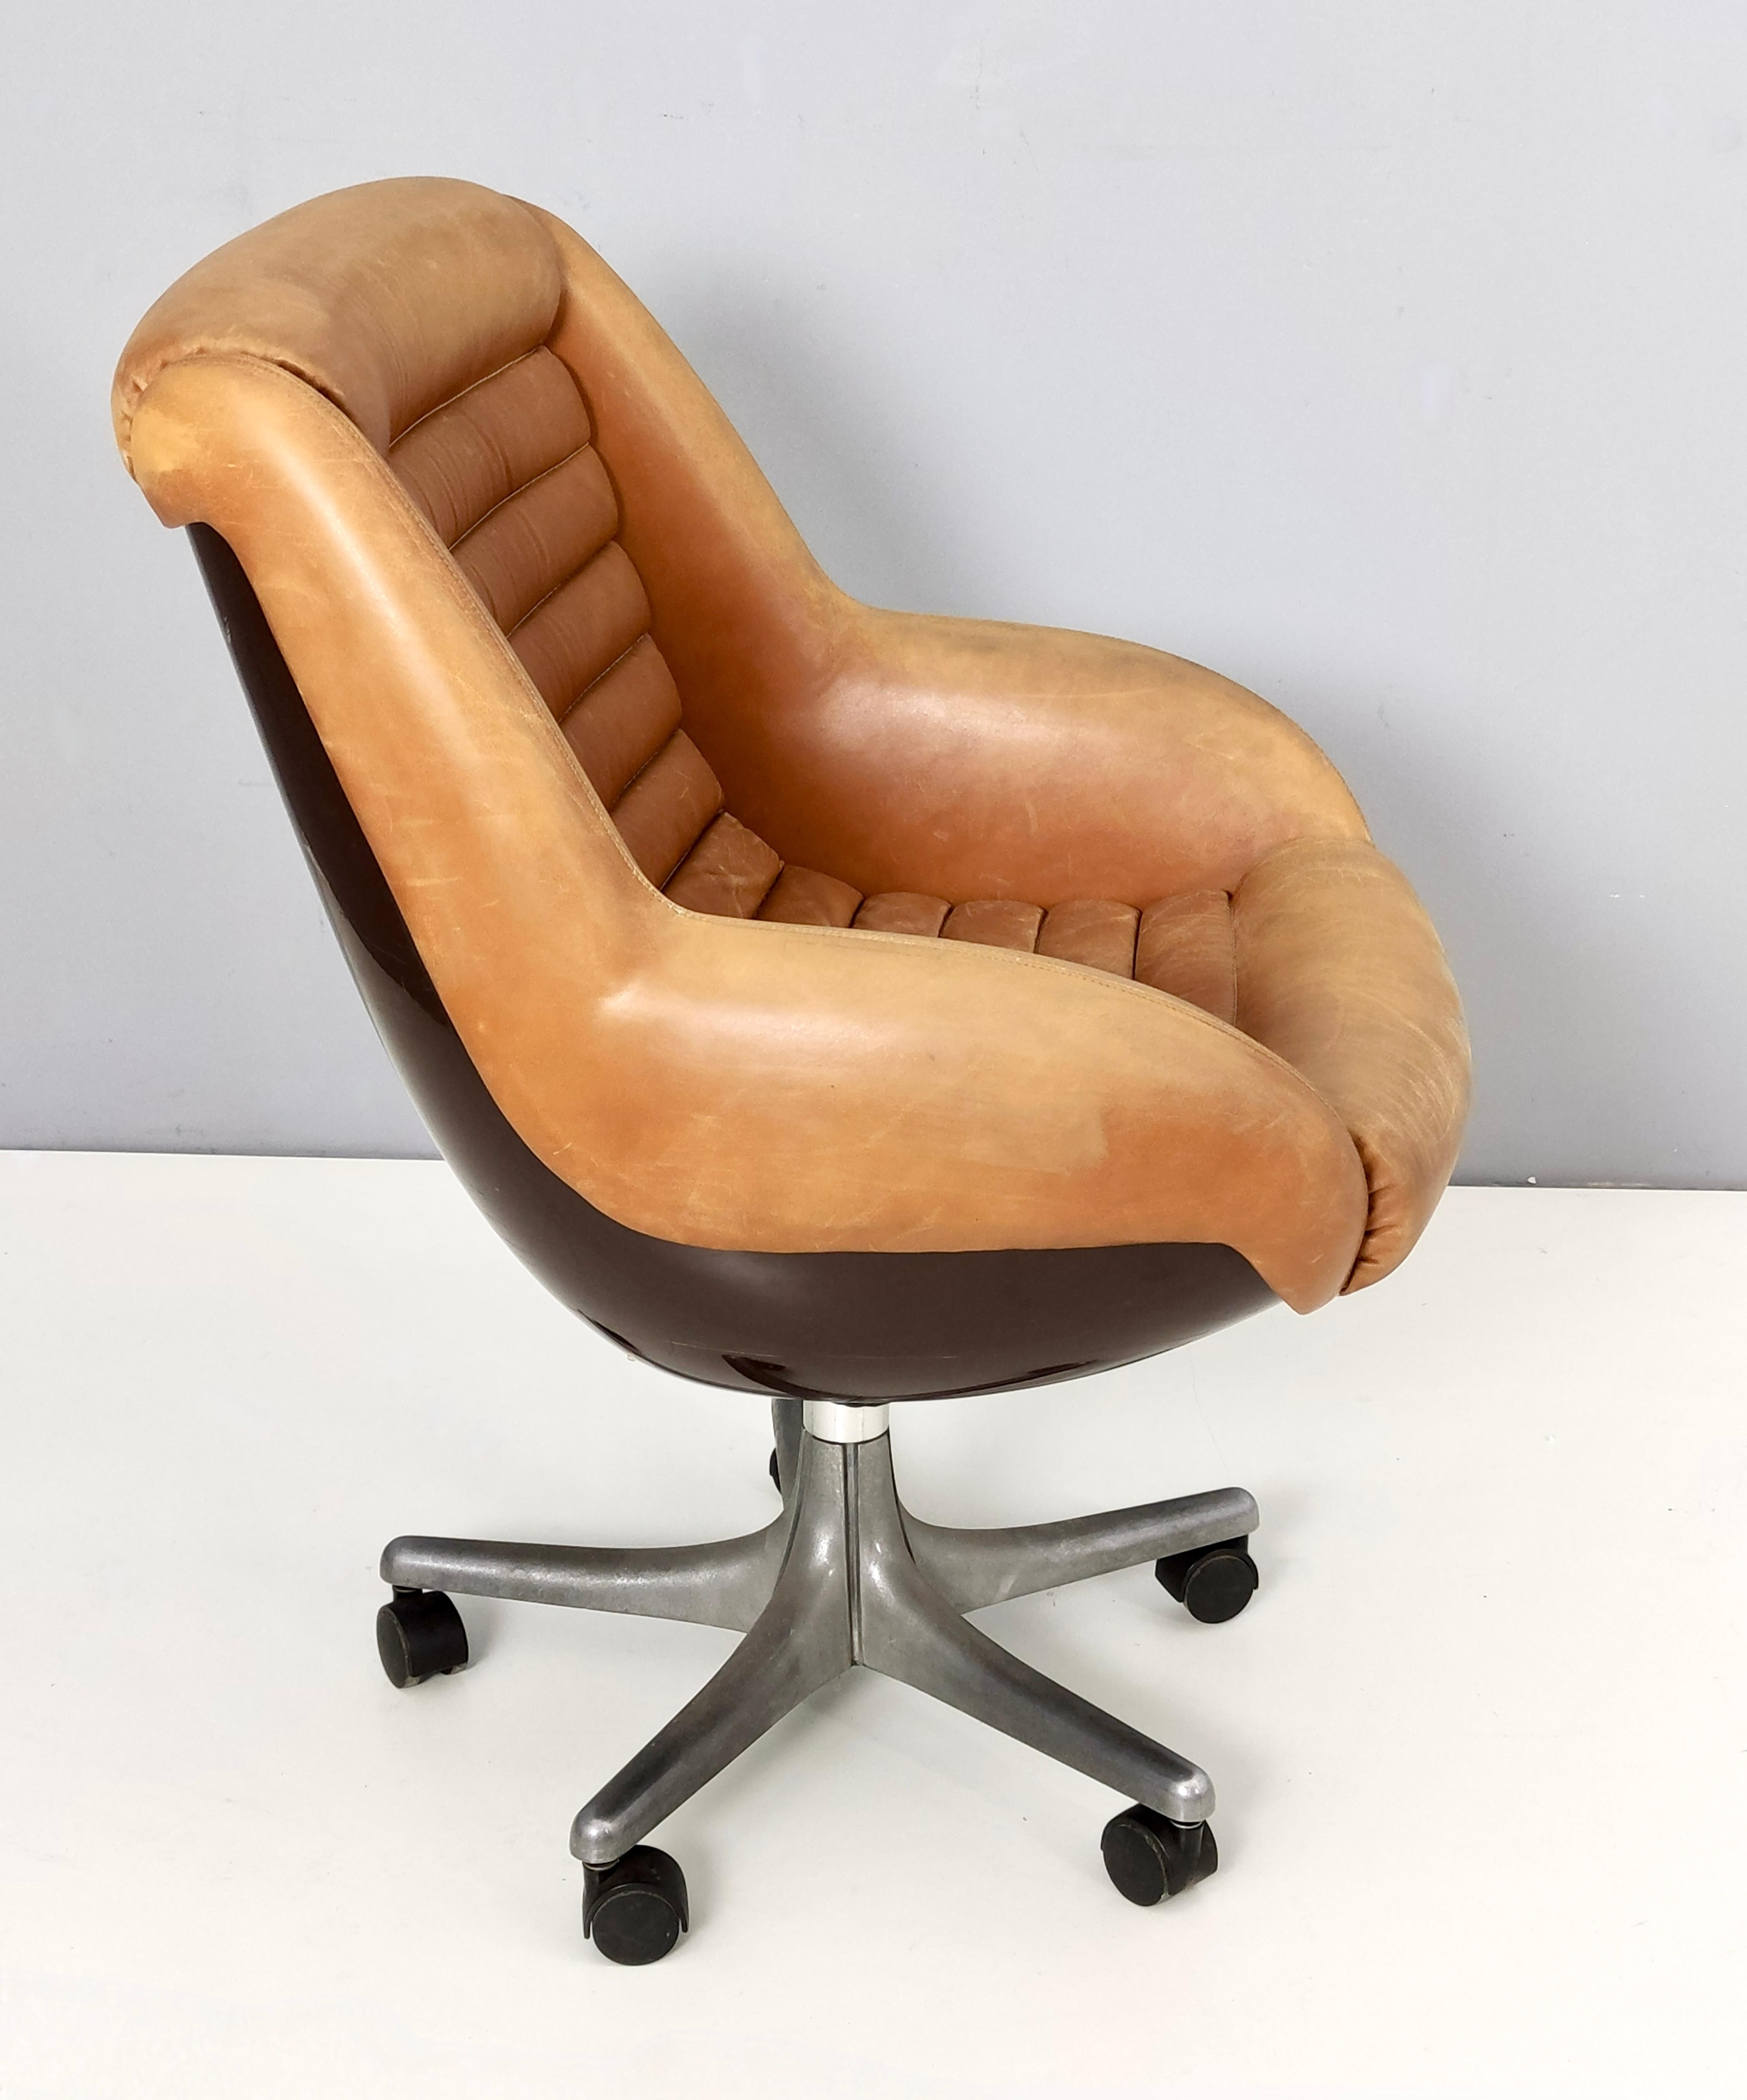 1960s office chair